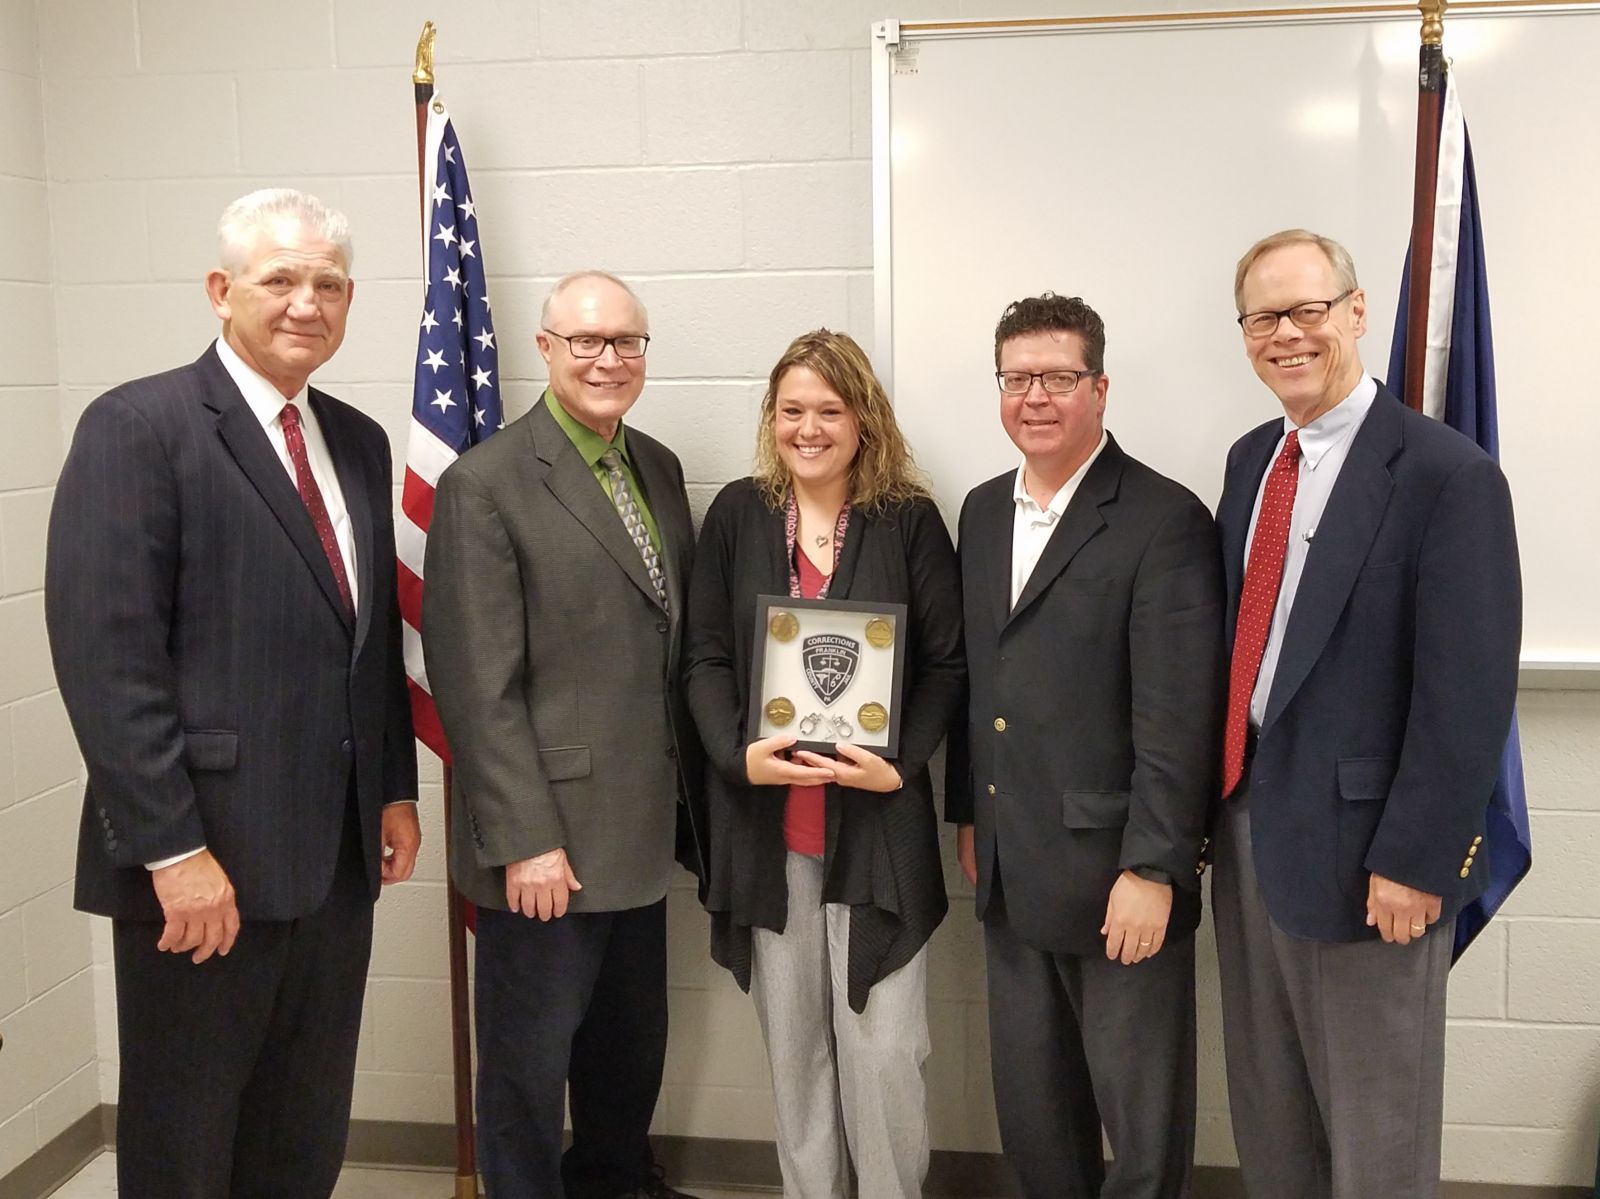 Pictured above, left to right: Former County Administrator John Hart, Commissioner Bob Thomas, Correctional Treatment Specialist and Correctional Worker of the Year Heather Franzoni, Commissioner Chairman Dave Keller, Commissioner Bob Ziobrowski